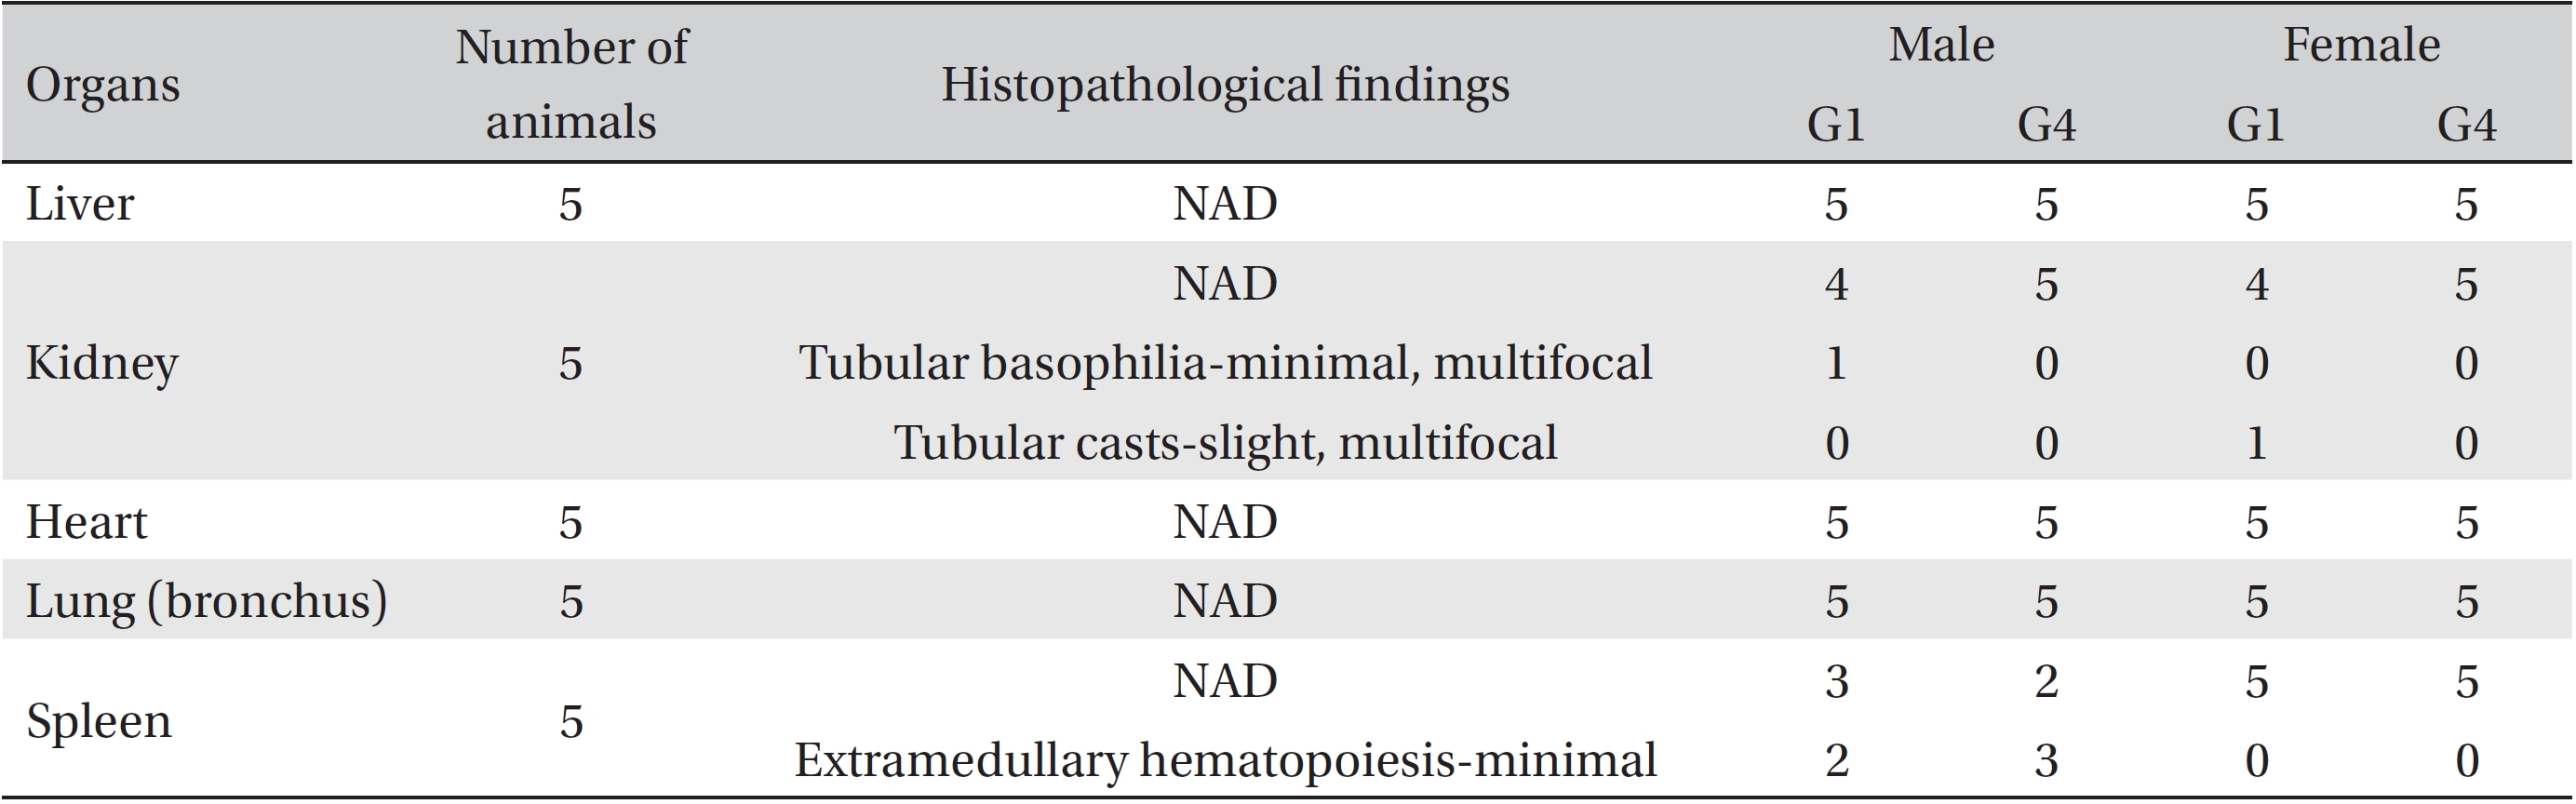 Histopathological findings of rats